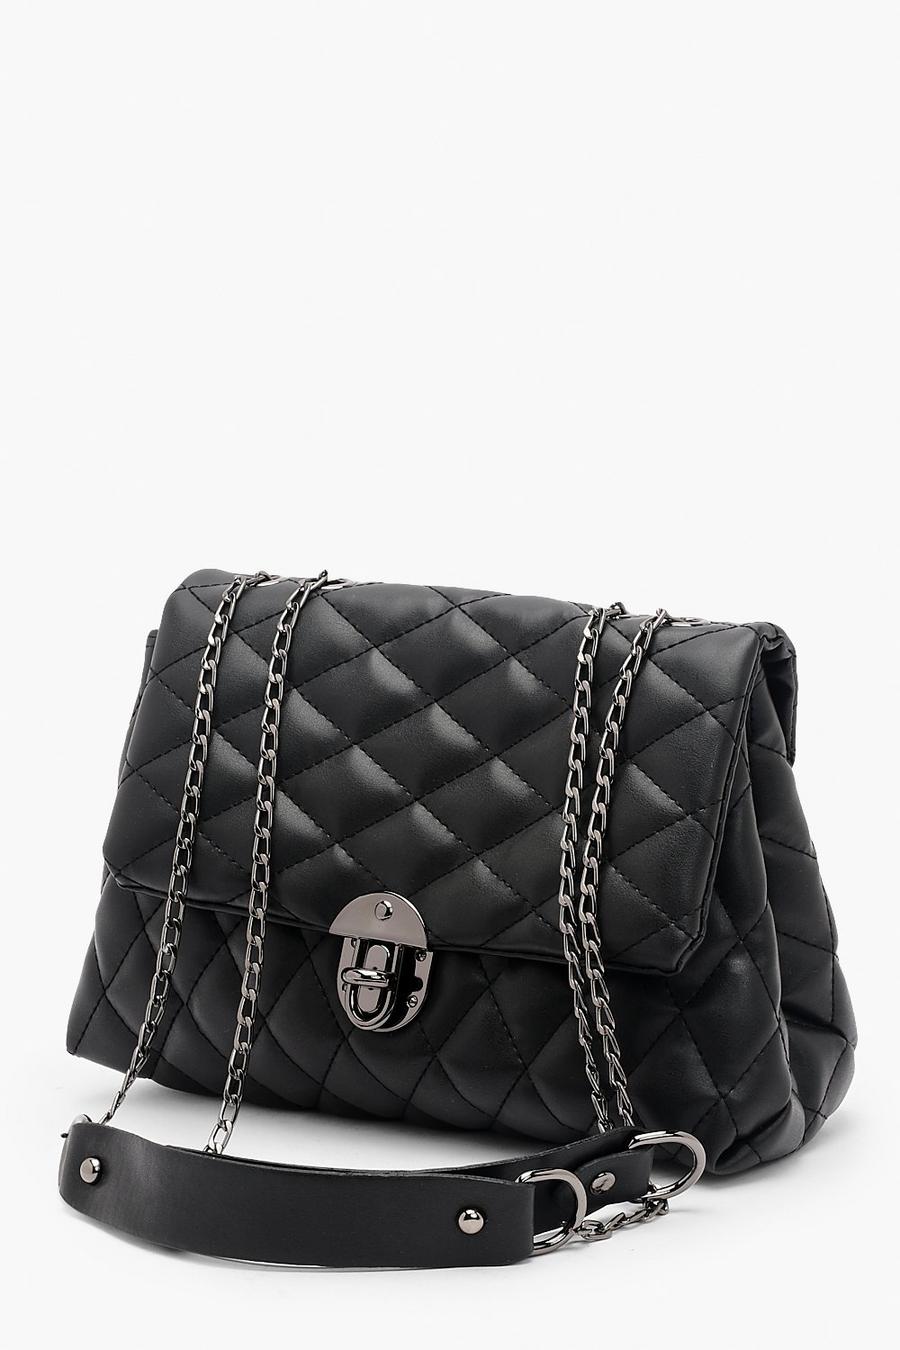 Black Quilted Chain Cross Body Bag image number 1